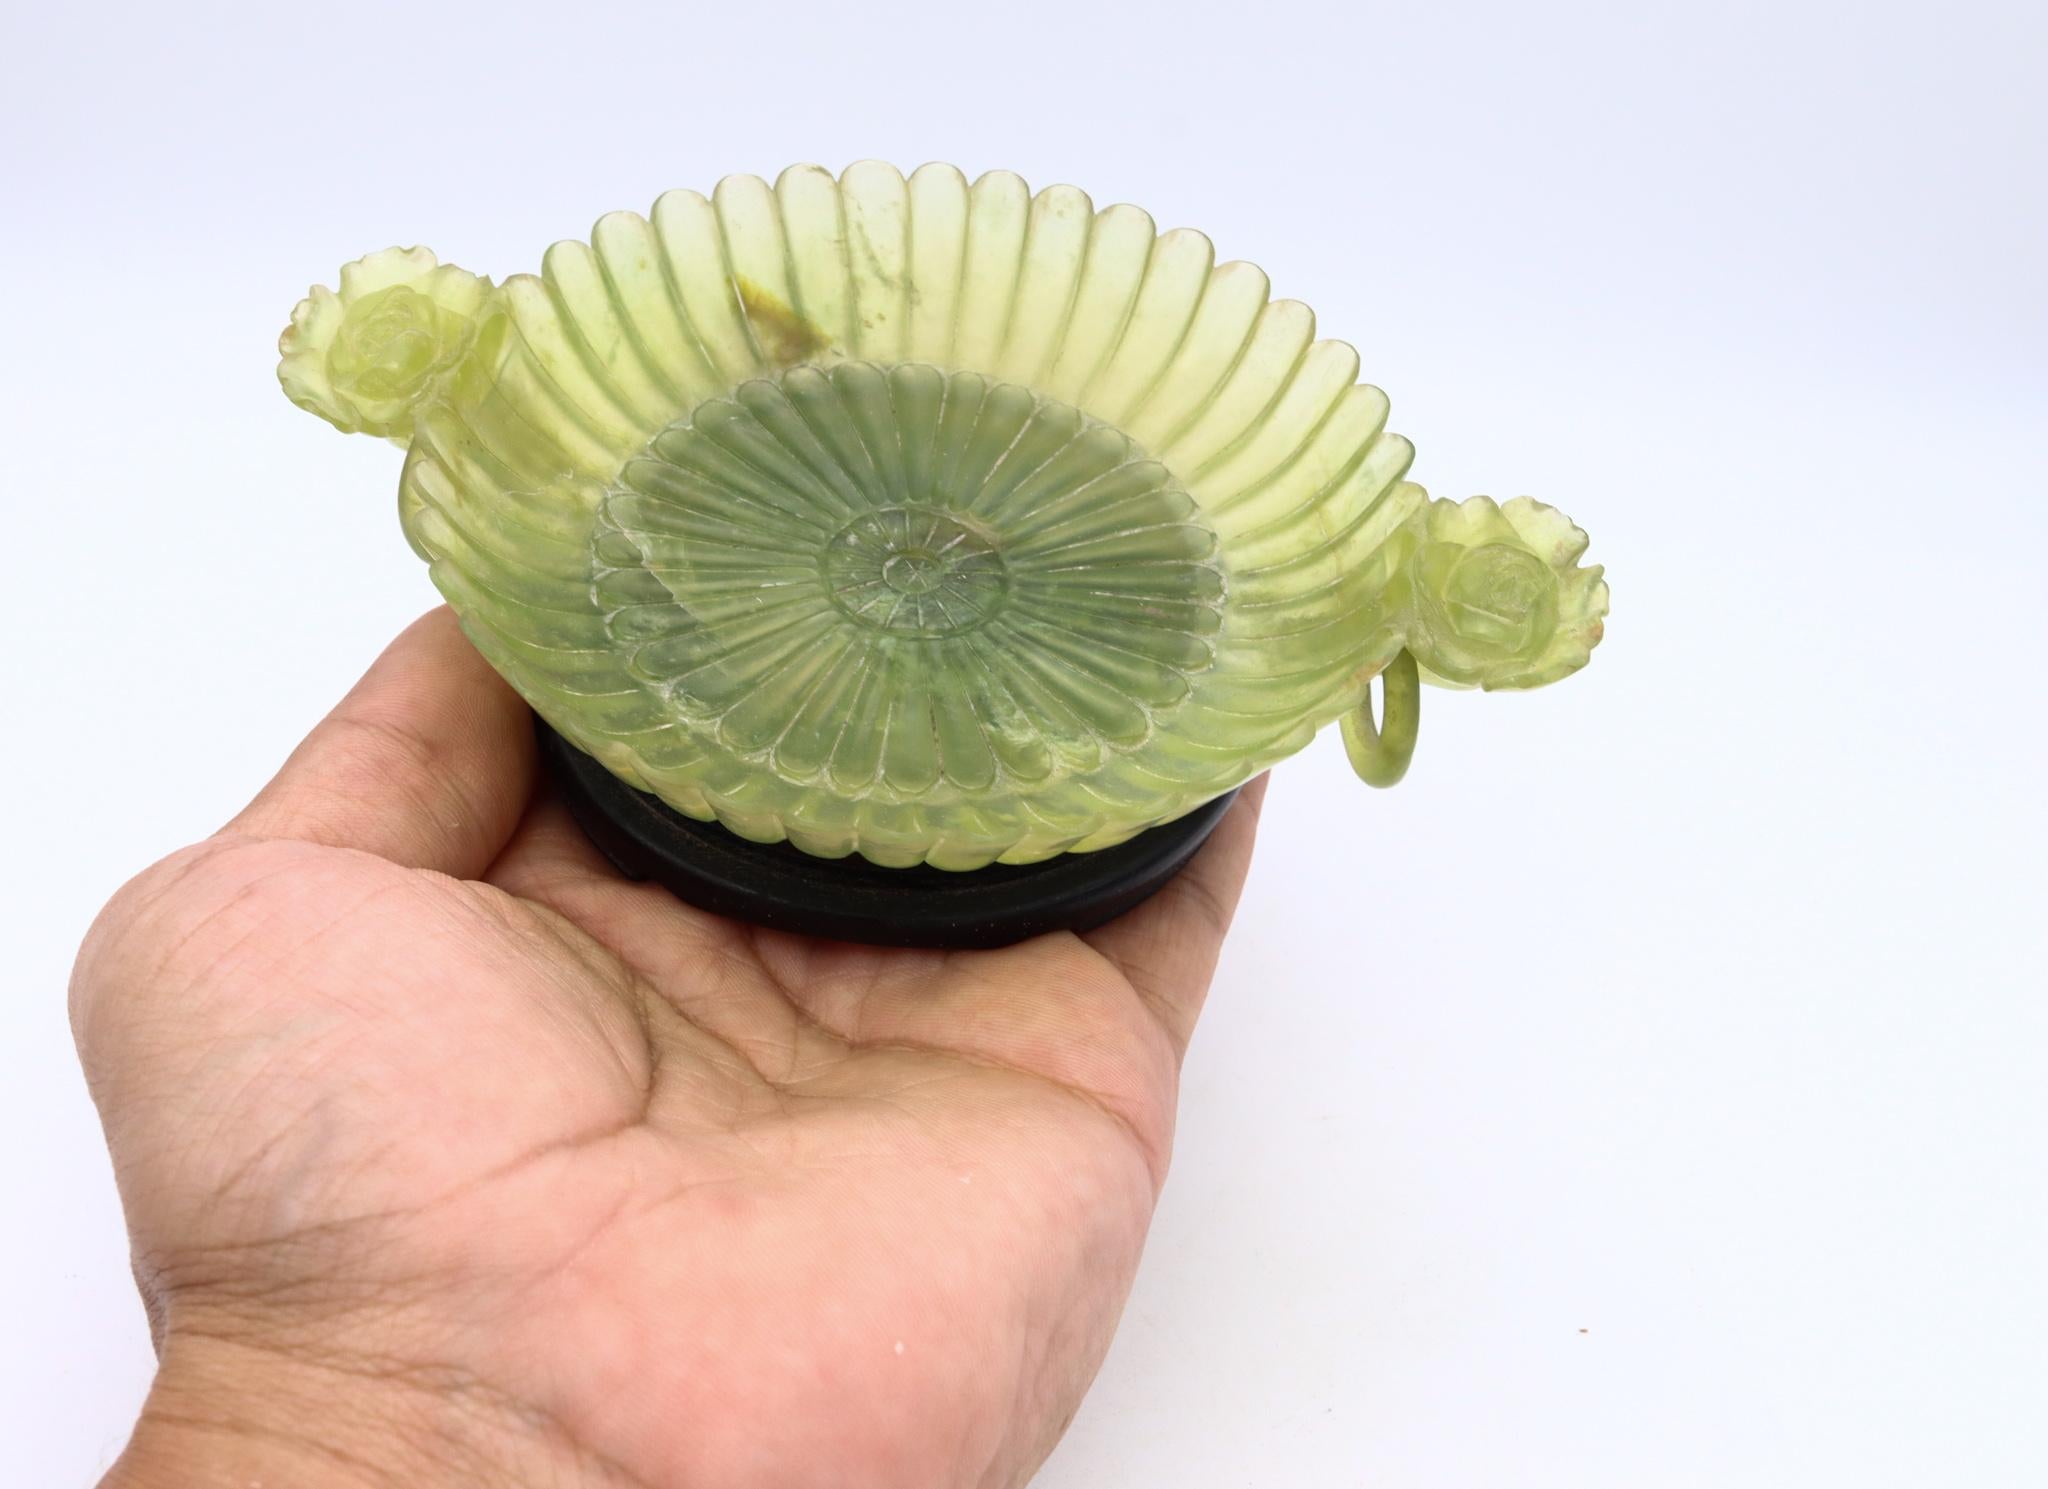 Hand-Carved China 1900 Qing Dynasty Serpentine Dish in the Shape of a Chrysanthemum Flower